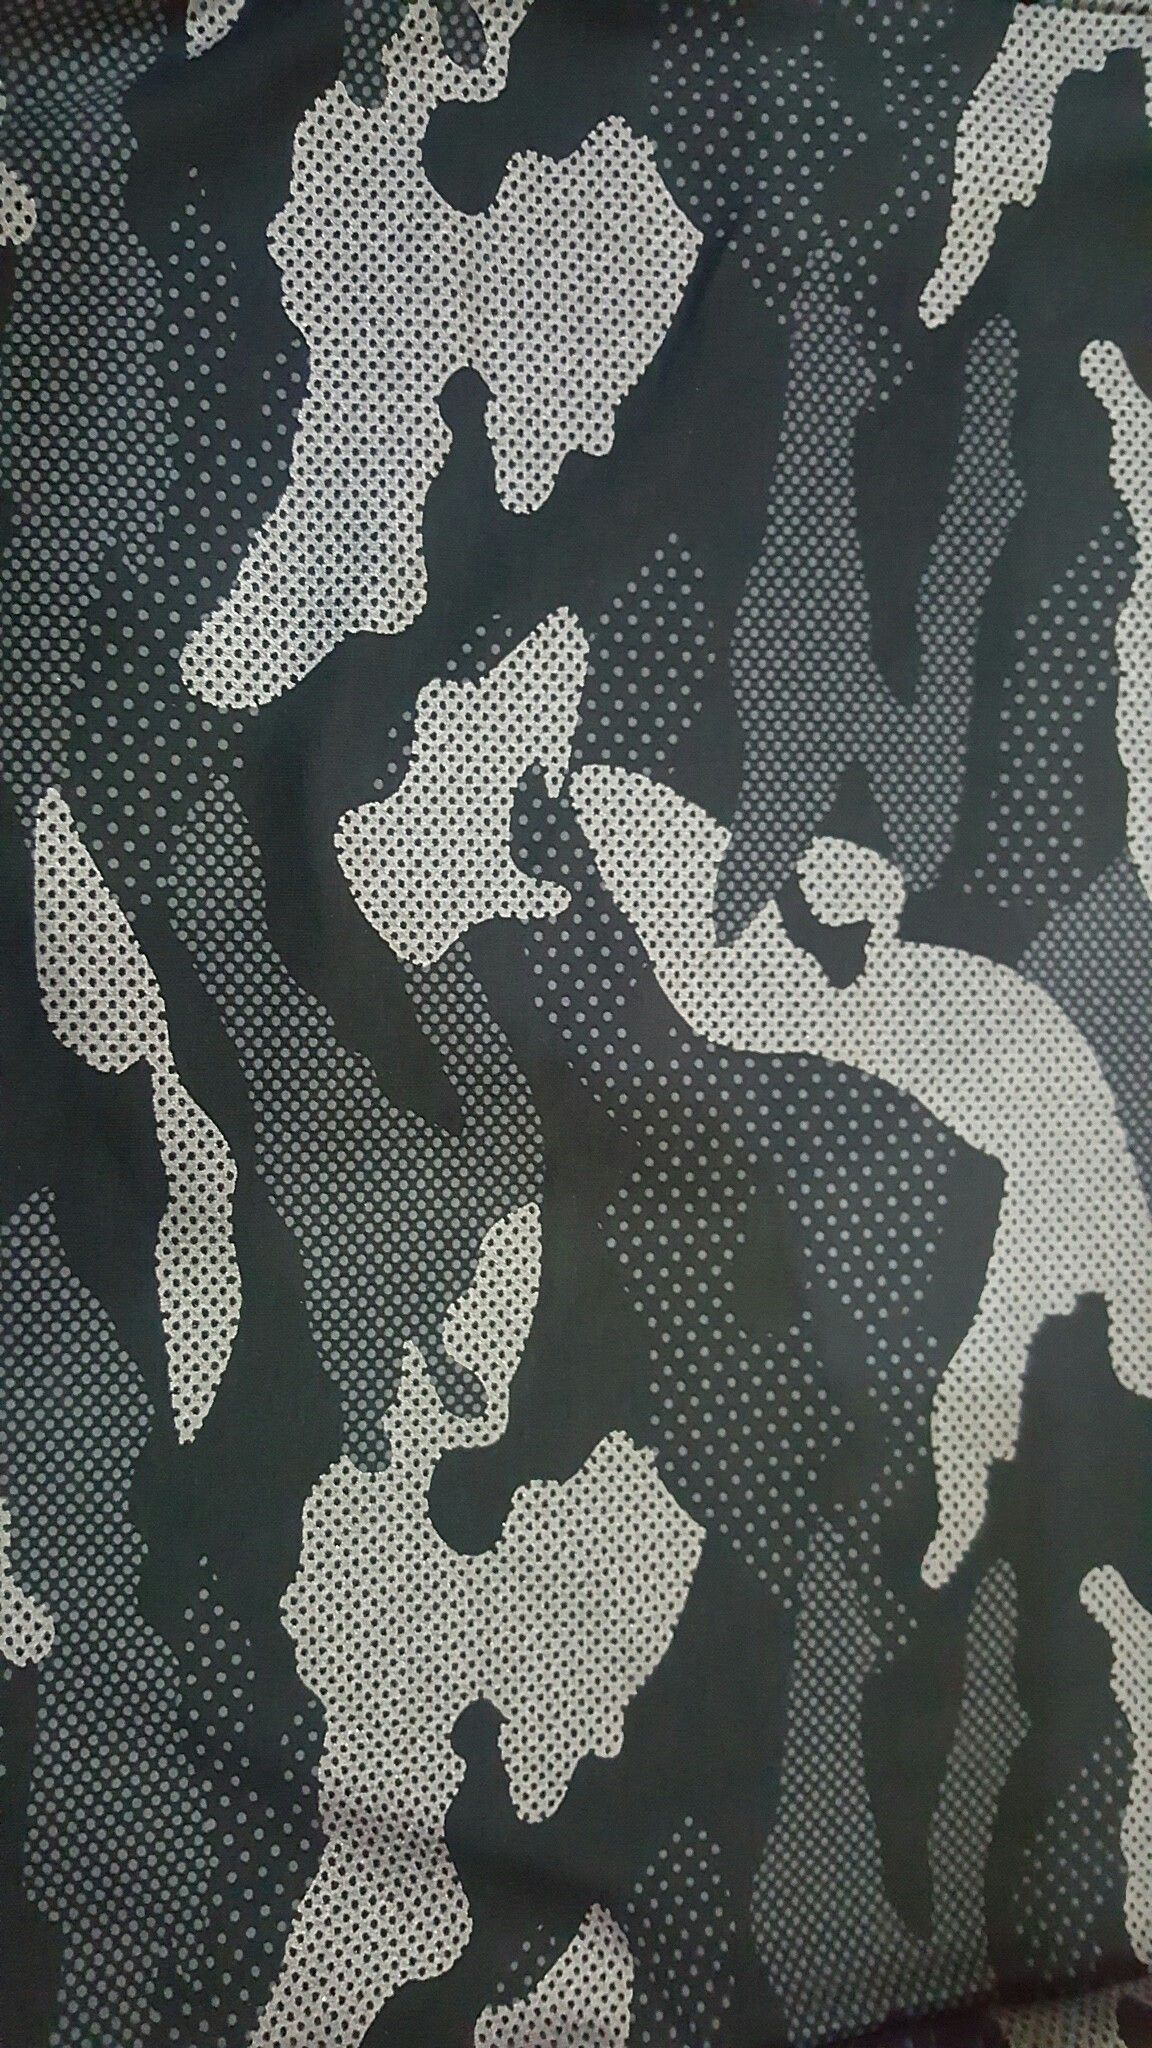 camouflage iphone wallpaper,military camouflage,pattern,camouflage,uniform,design